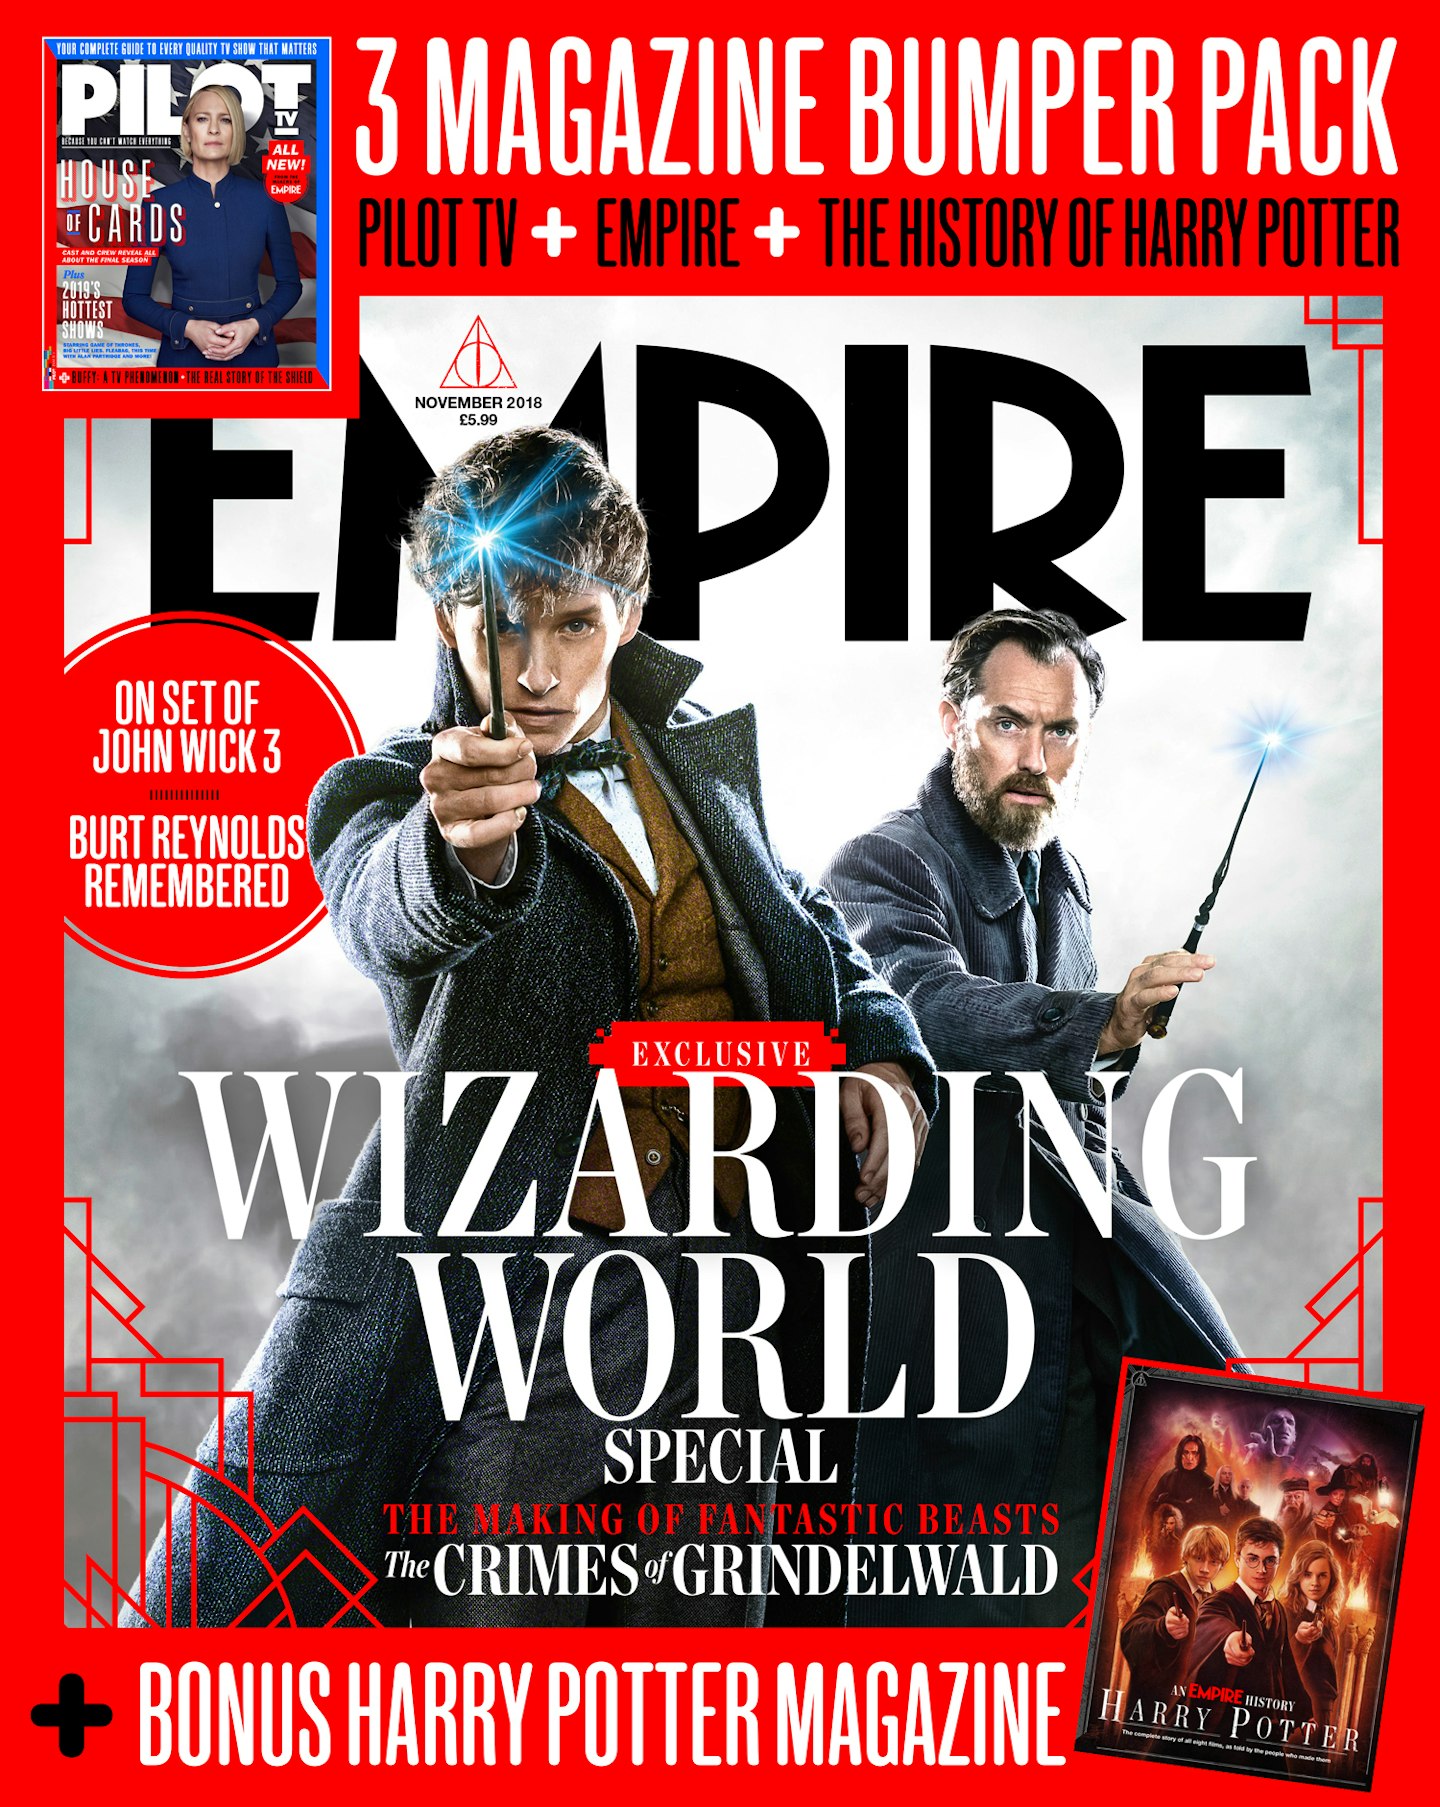 Empire - November 2018 cover – Fantastic Beasts The Crimes of Grindelwald